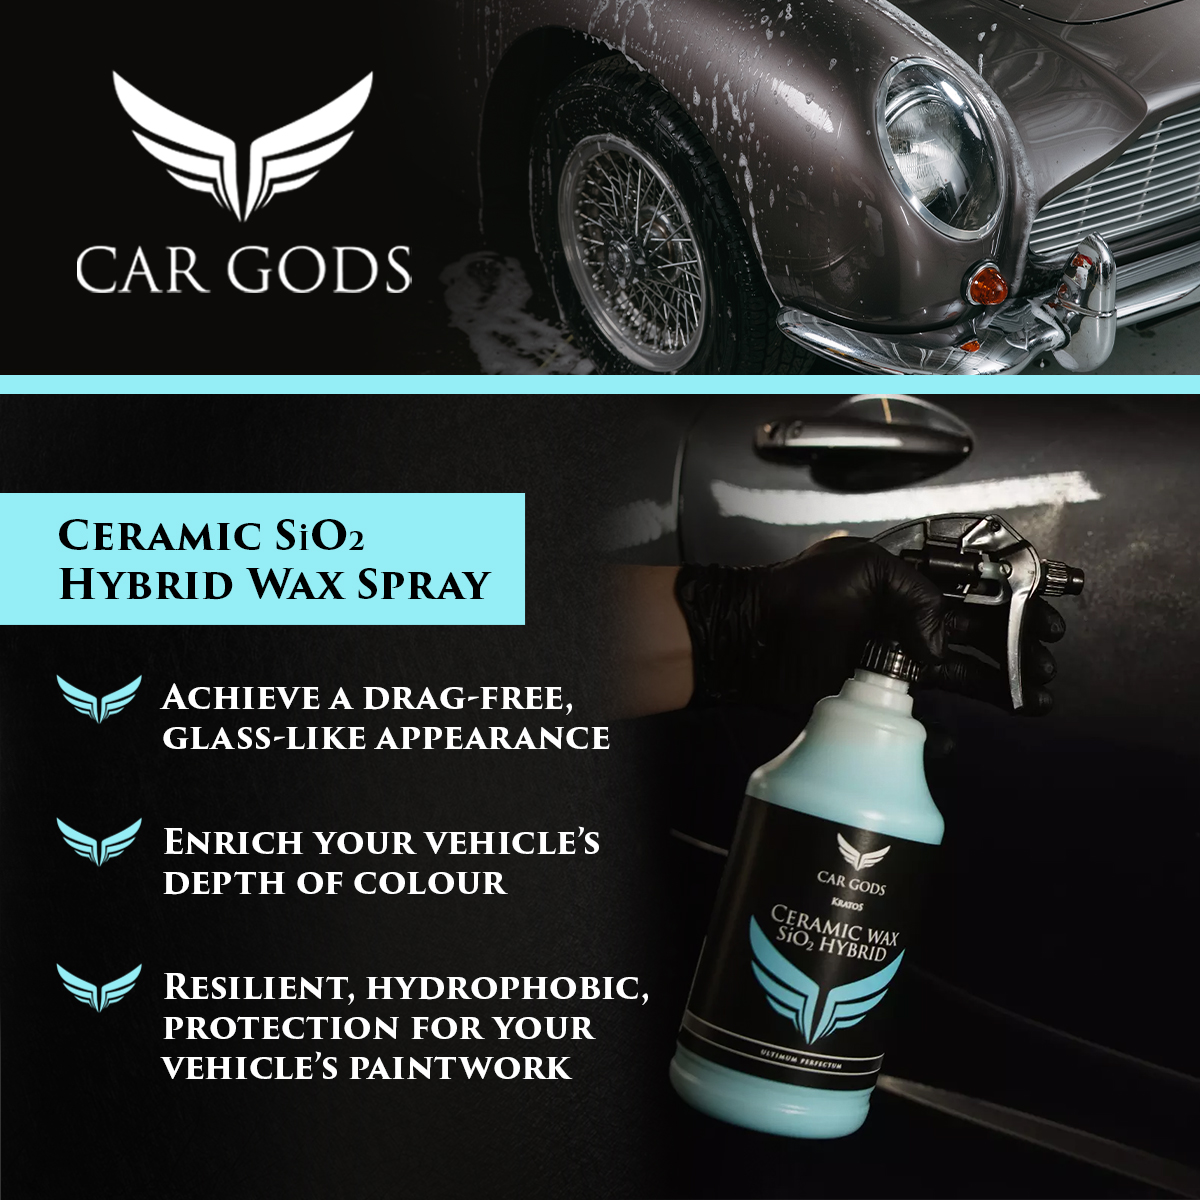 Car Gods Ceramic SiO2 Hybrid Wax Spray. Advanced hybrid SiO2 ceramic coating helping you achieve a drag-free glass-like, silky smooth vehicle appearance, and to enrich your vehicle’s depth of colour with resilient, hydrophobic, paintwork protection.